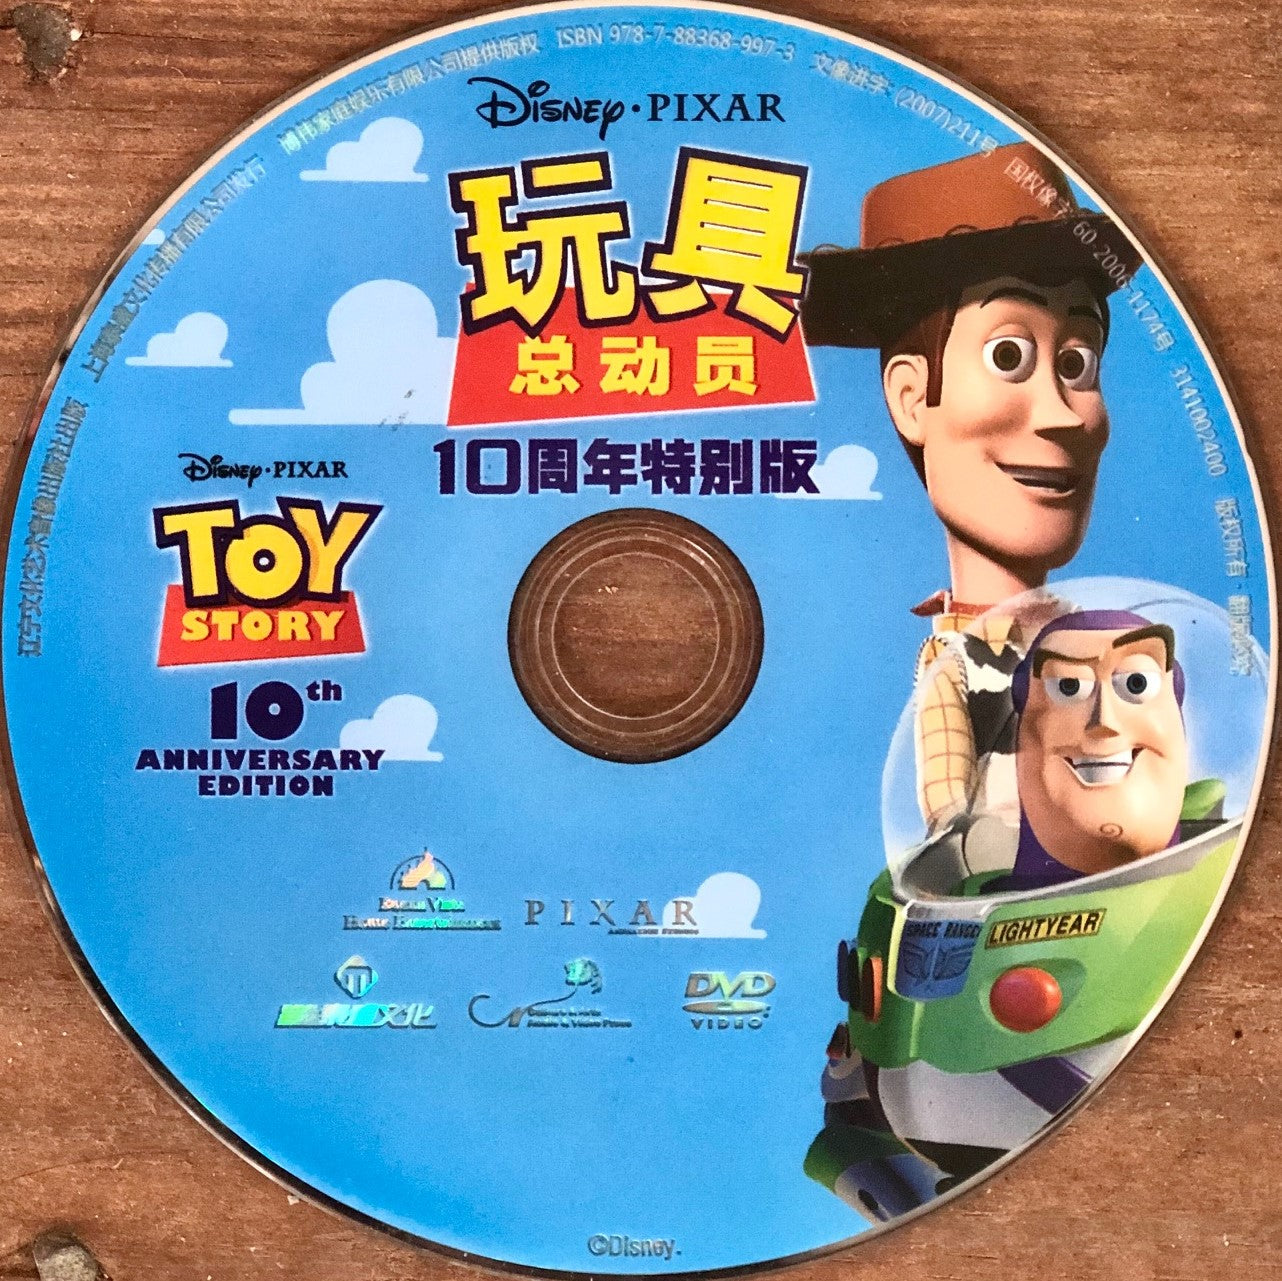 Toy Story DVD (Disc 1: Toy Story)